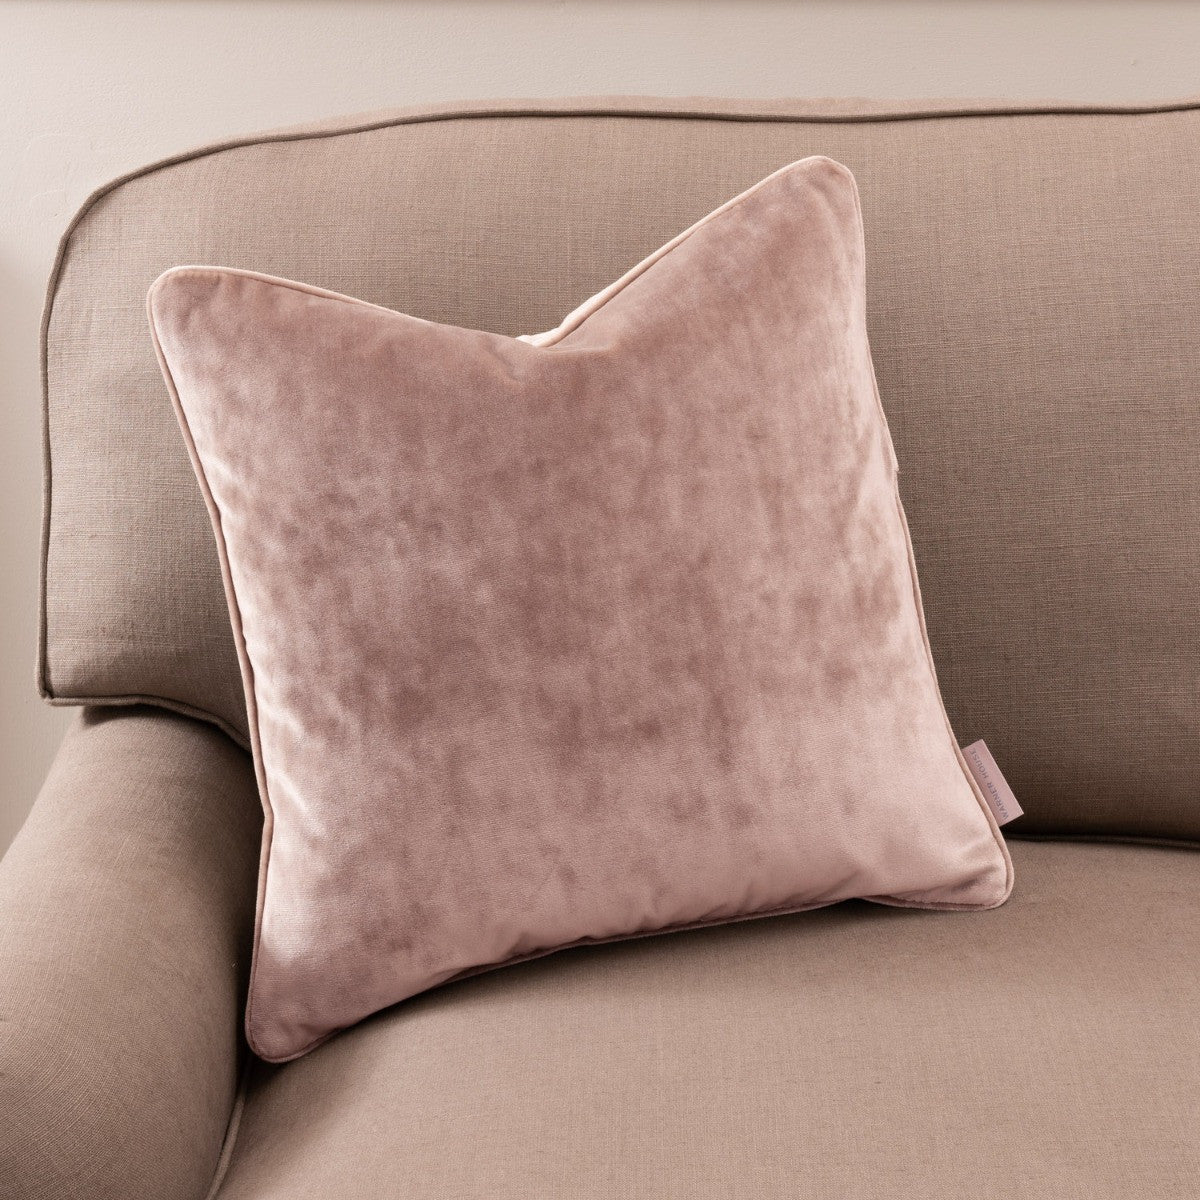 LUSSO Rose Woven Cushion - Warner House